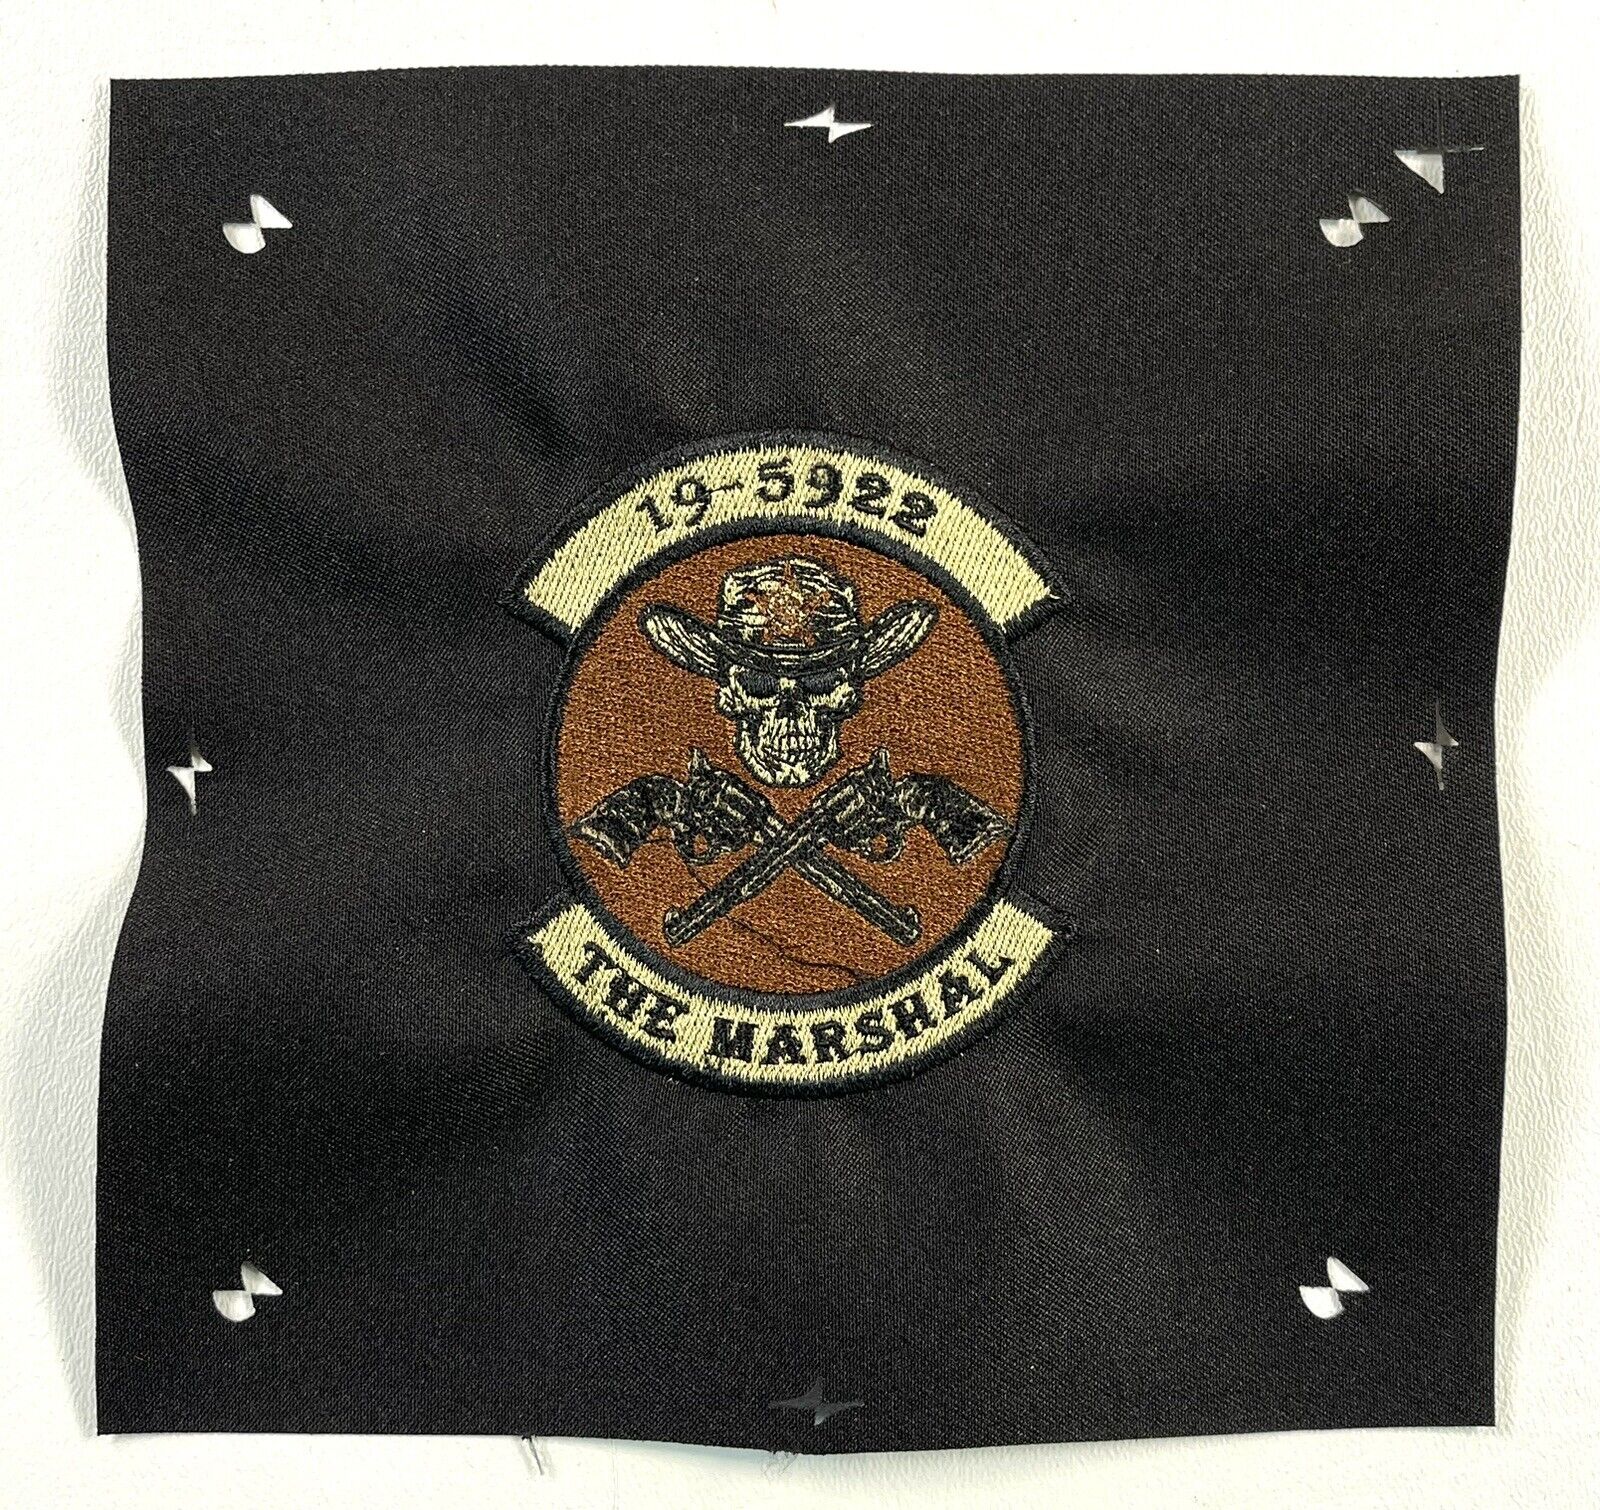 US Army The Marshal 19-5922 Skull Security Force Rare Prototype Stitched Patch